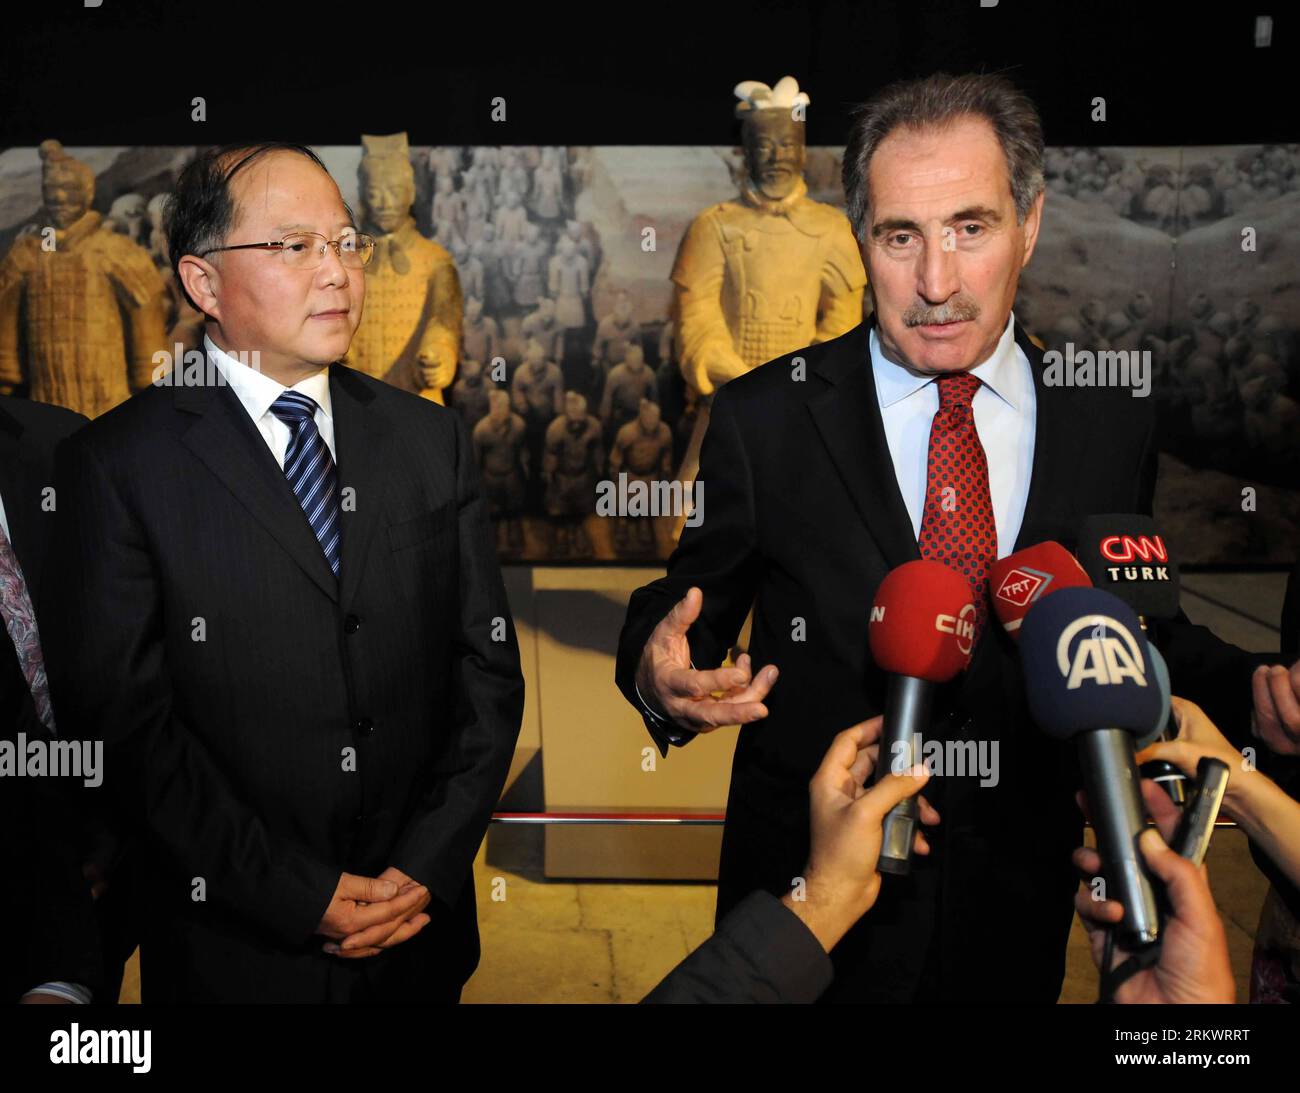 Bildnummer: 58724321  Datum: 20.11.2012  Copyright: imago/Xinhua ISTANBUL, Nov. 20, 2012 - Chinese Vice Culture Minister Li Xiaojie (L) looks on as Turkish Culture and Tourism Minister Ertugrul Gunay speaks to media during the opening ceremony of the Treasures of Ancient China Exhibition held at Topkapi Palace Museum in Istanbul of Turkey, on Nov. 20, 2012. The Exhibition kicked off here on Tuesday. (Xinhua/Ma Yan)(zcc) TURKEY-ISTANBUL-CHINA-TREASURES EXHIBITION PUBLICATIONxNOTxINxCHN Politik people xas x0x 2012 quer     58724321 Date 20 11 2012 Copyright Imago XINHUA Istanbul Nov 20 2012 Chin Stock Photo